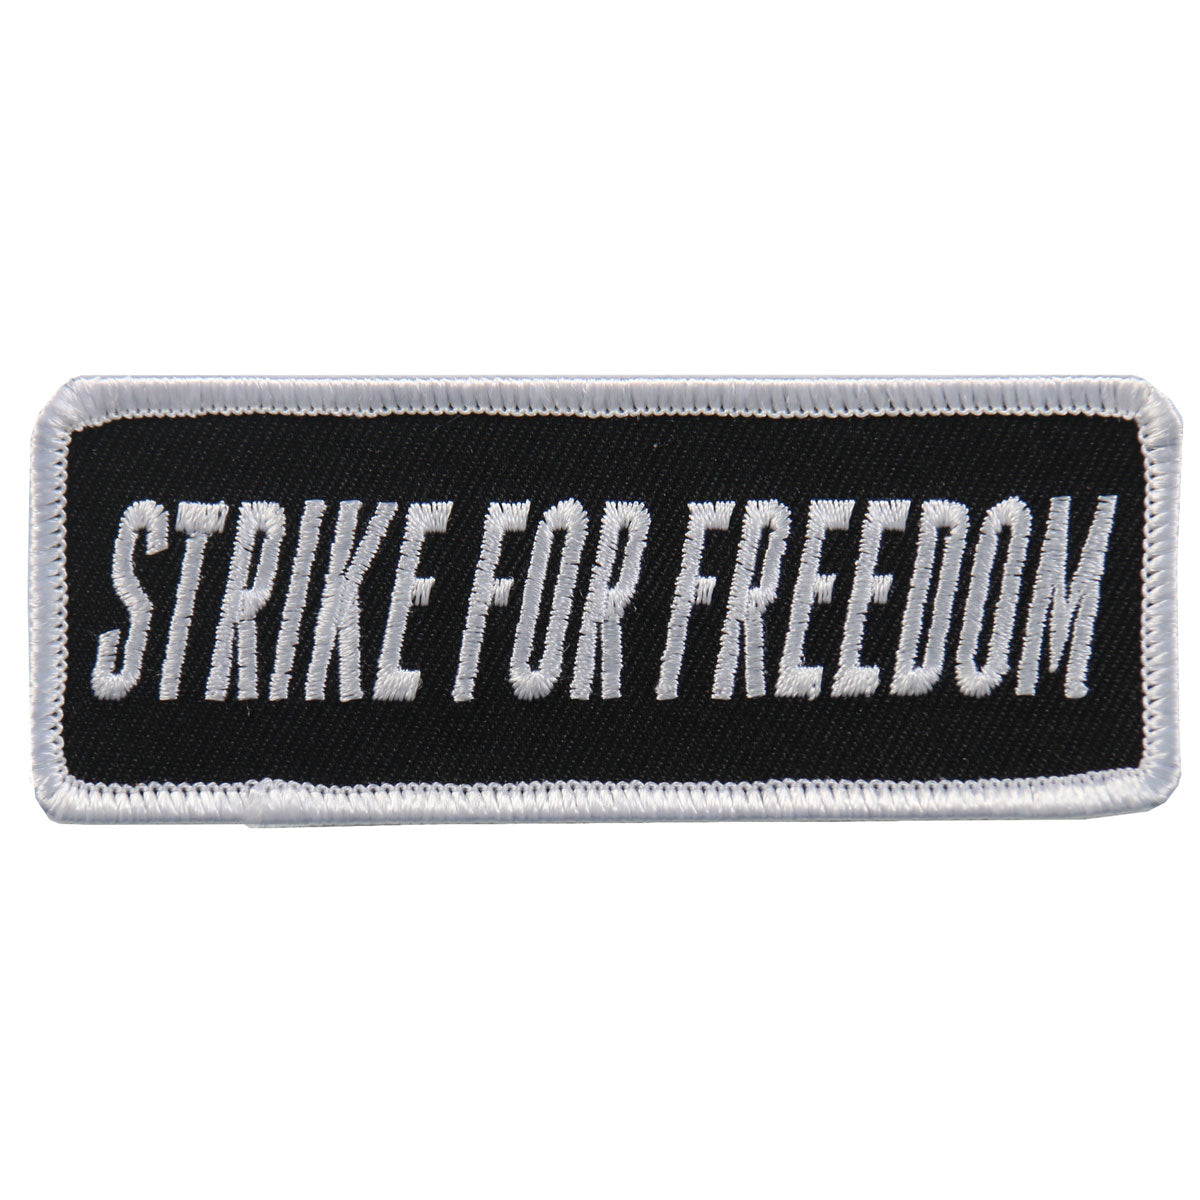 Hot Leathers Strike for Freedom 4"x2" Patch